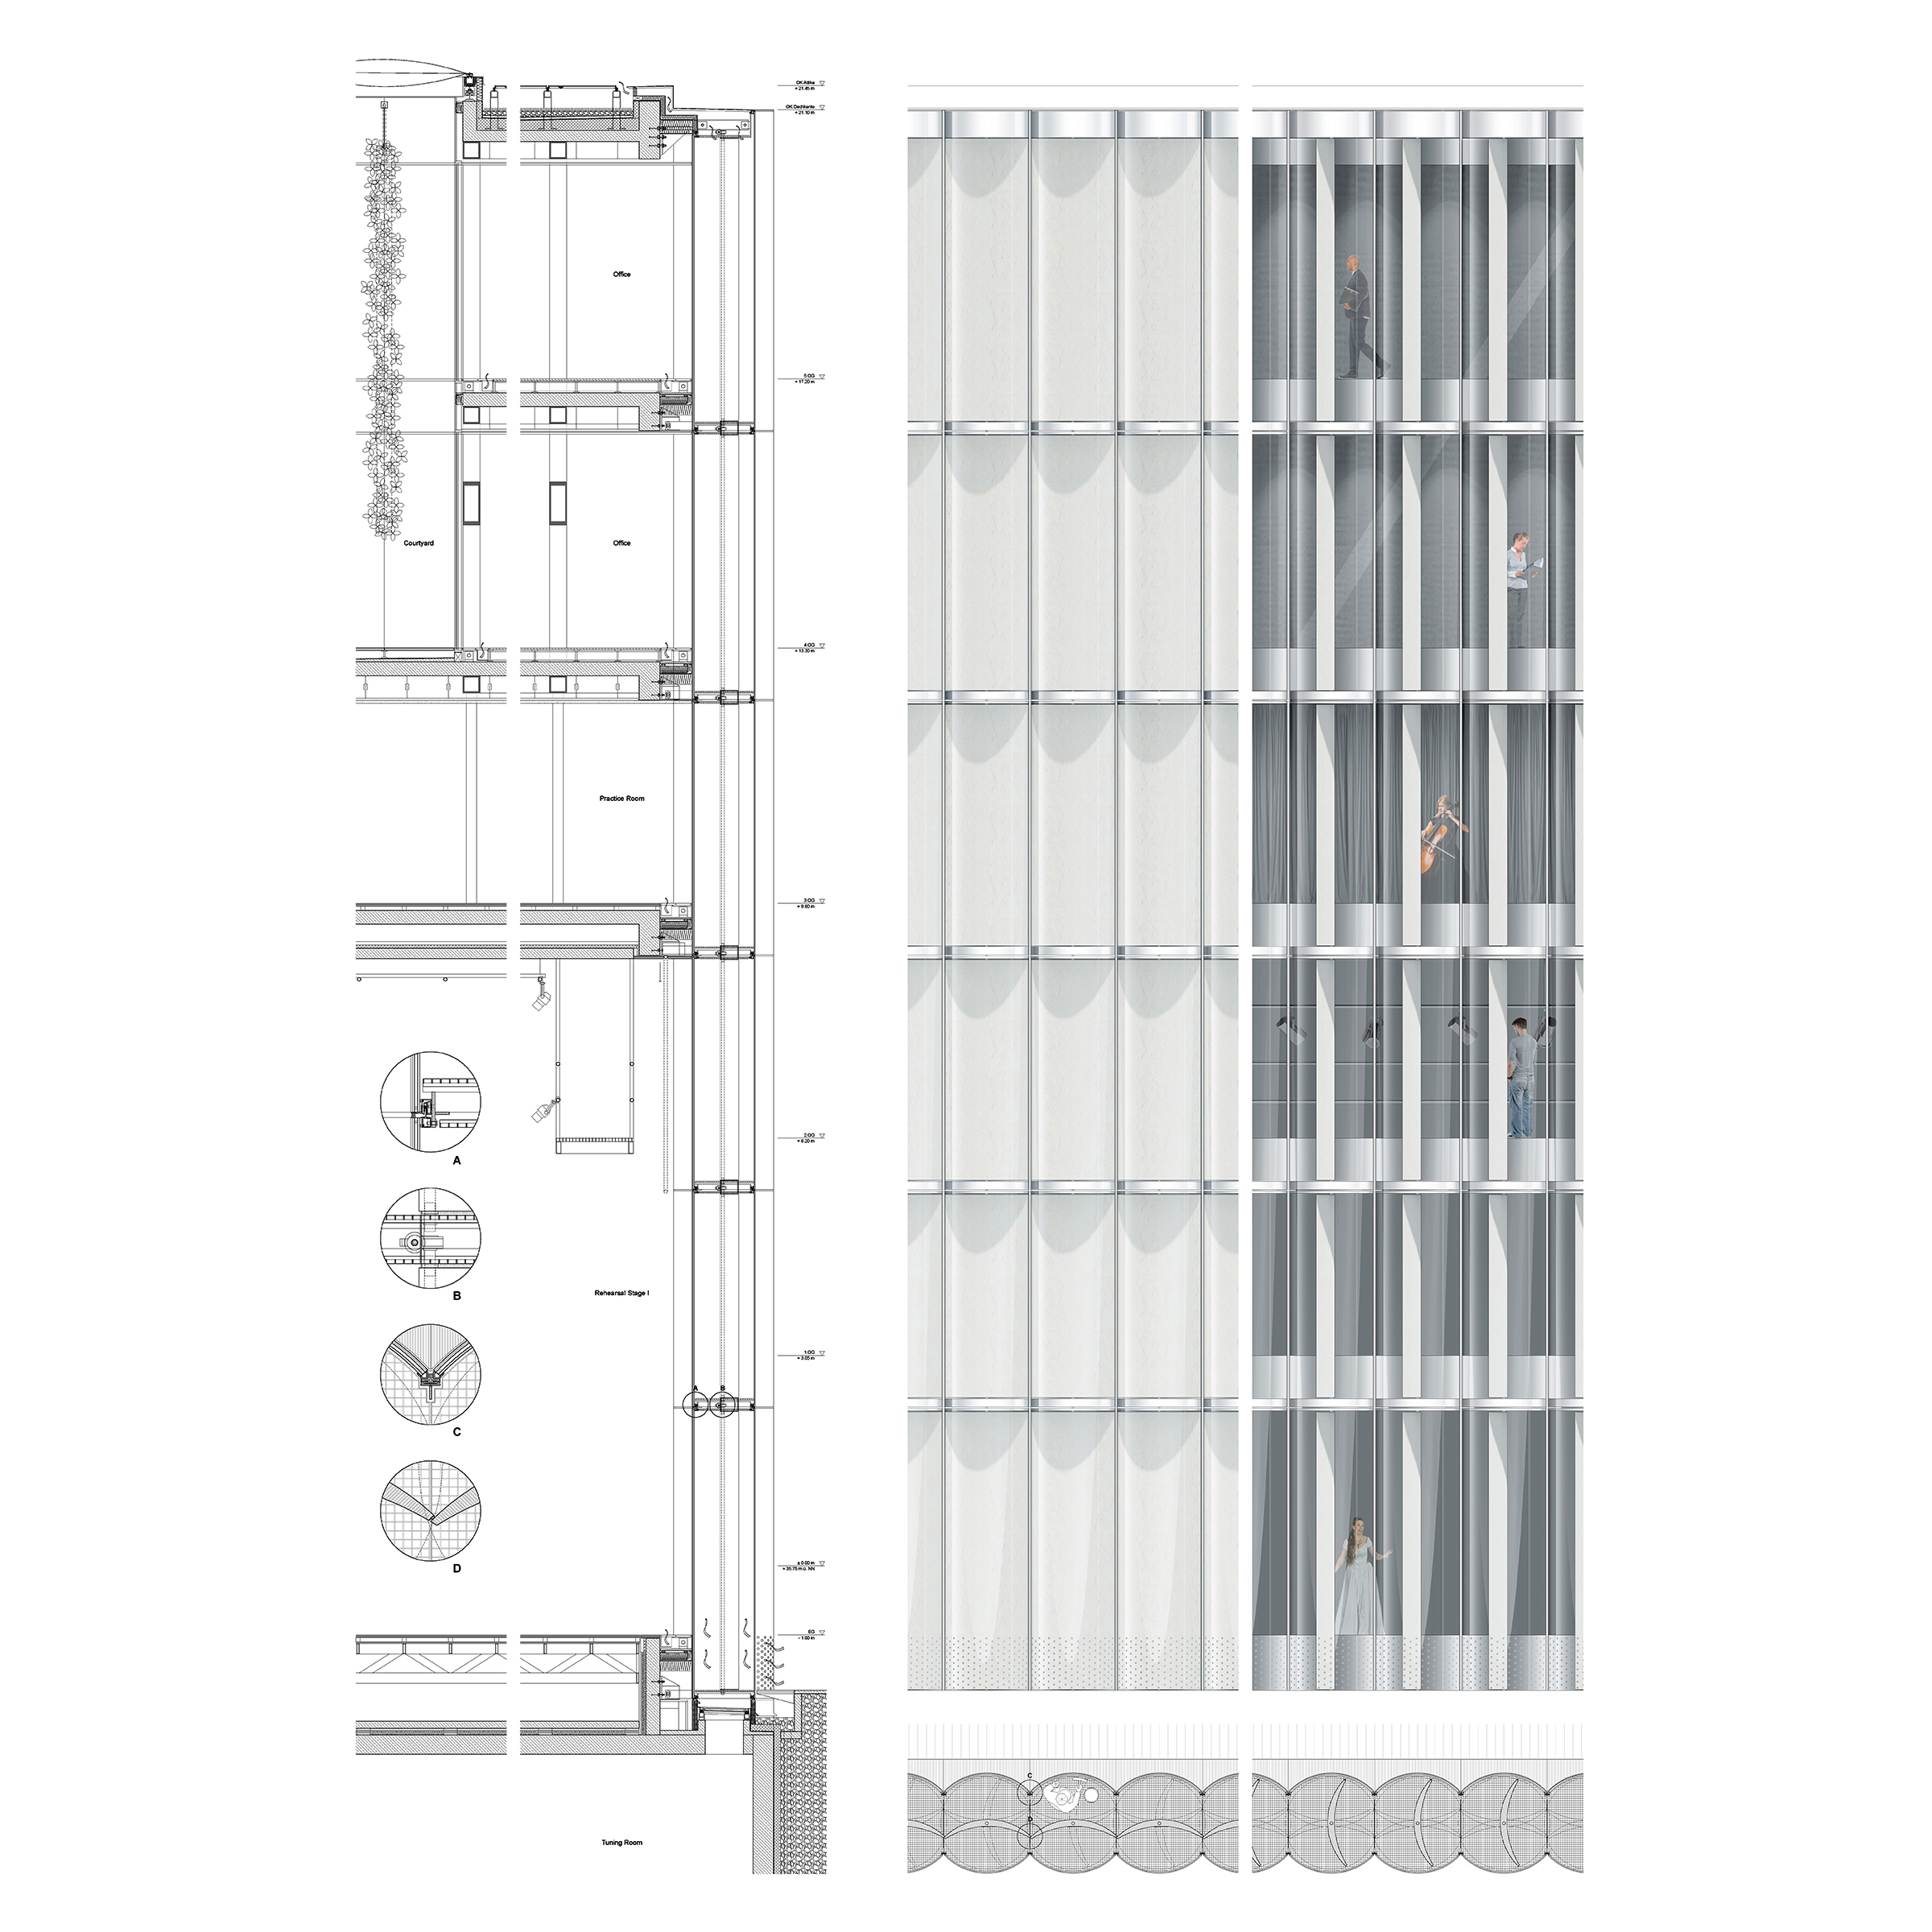 Detail drawings of the Komische Oper Expansion's façade.